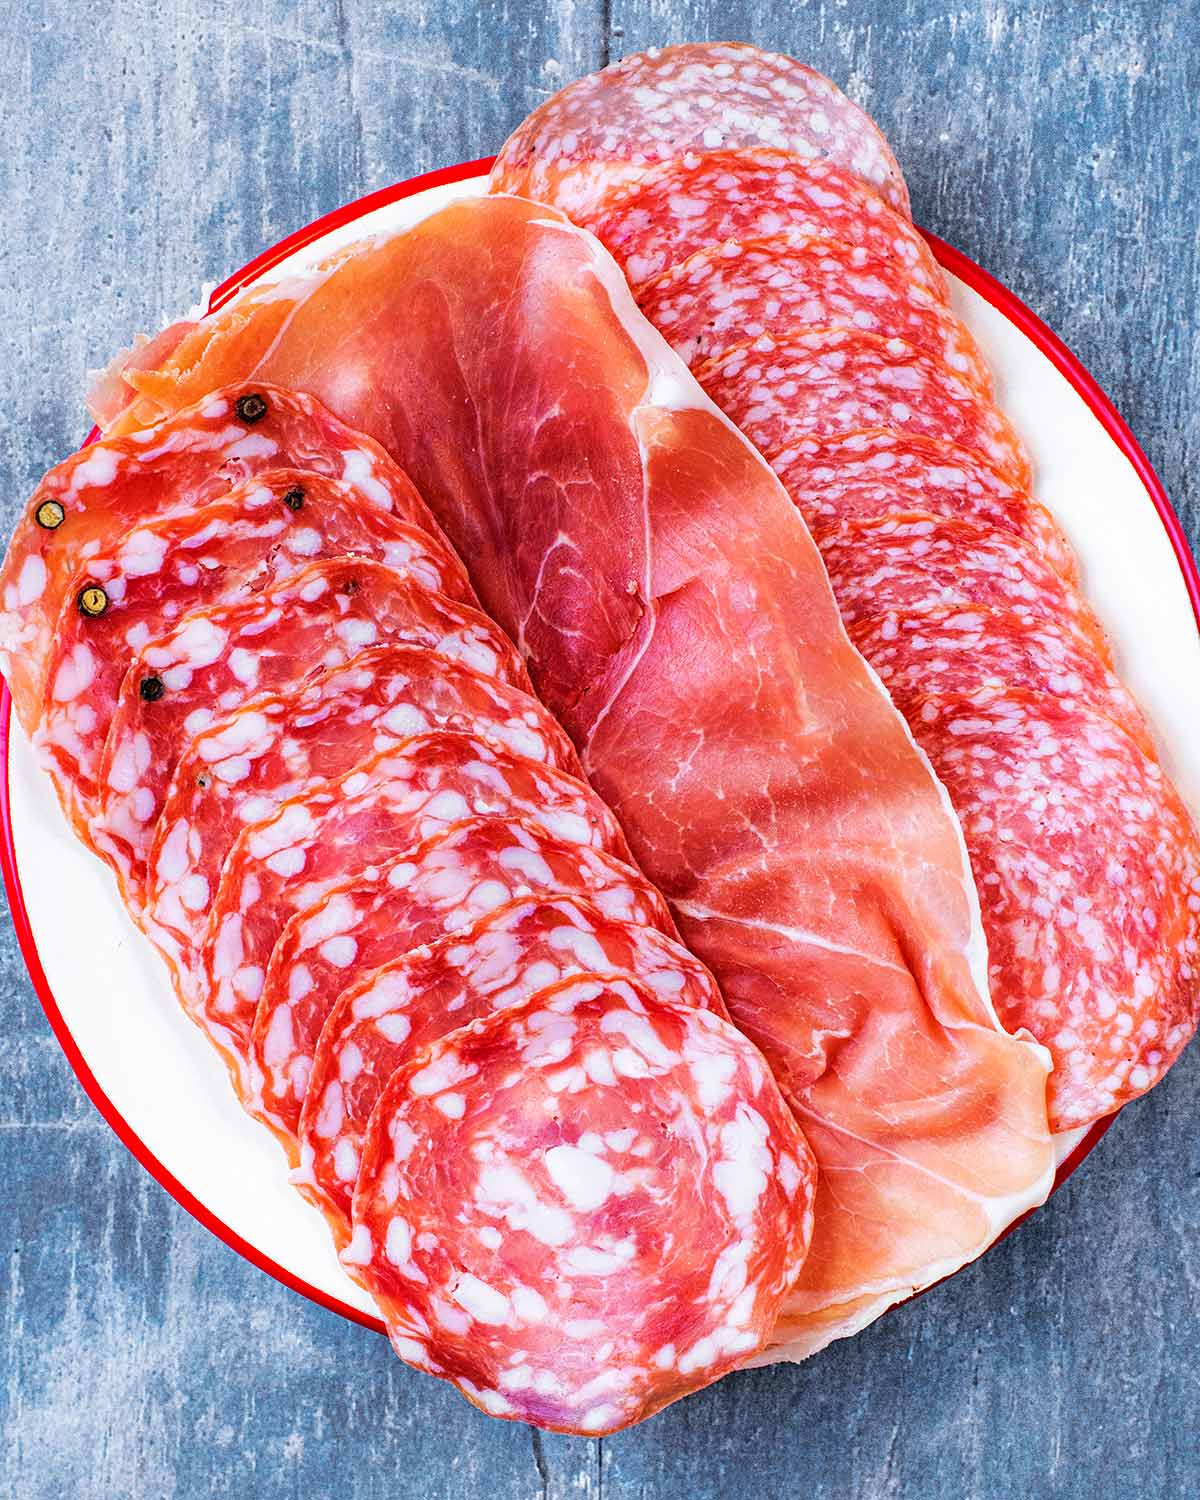 A selection of three cured meats on a white plate.